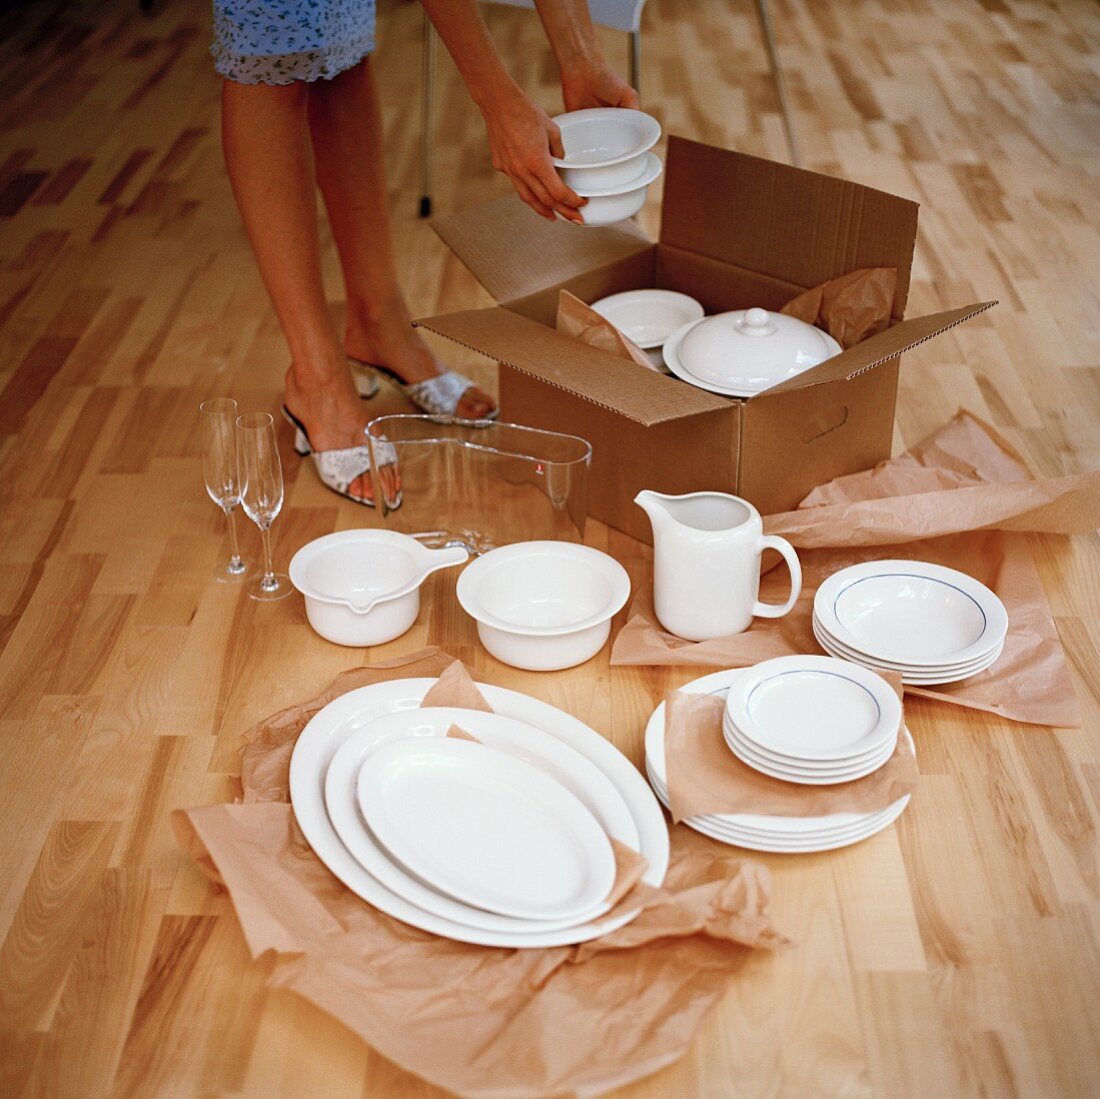 Woman unpacking white porcelain from box